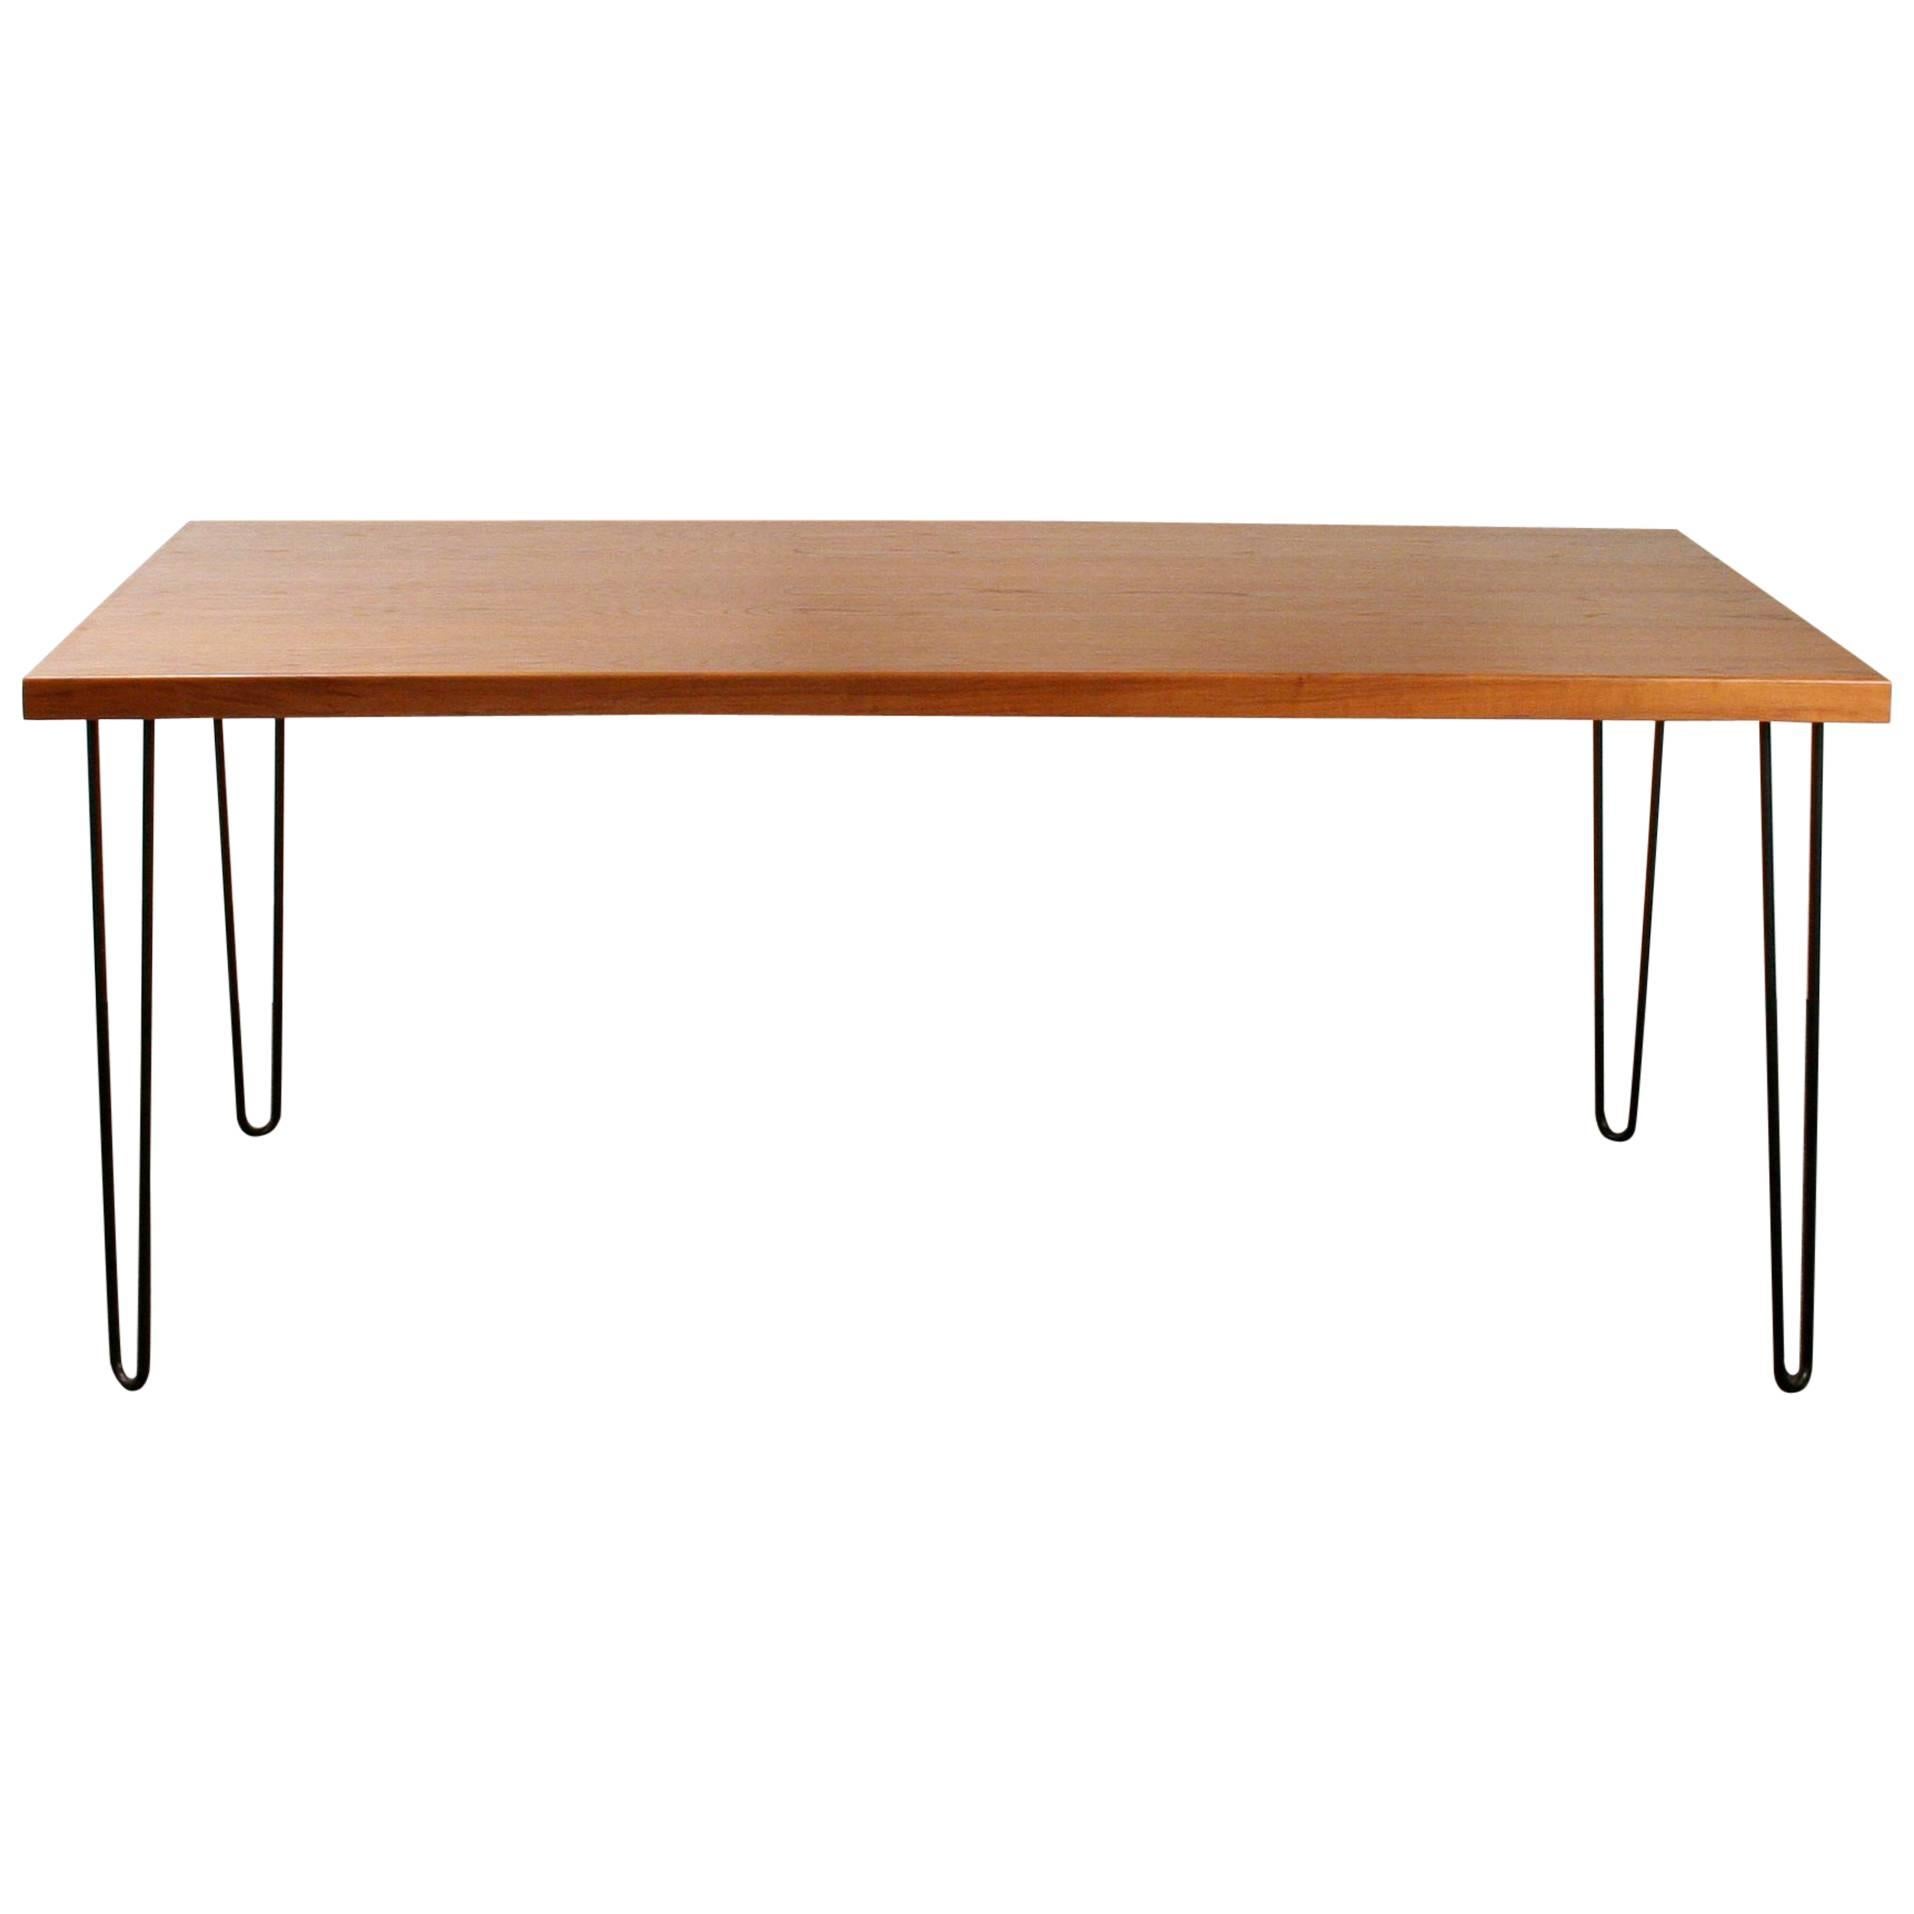 Teak Black Hairpin Legs Dining Table For Sale